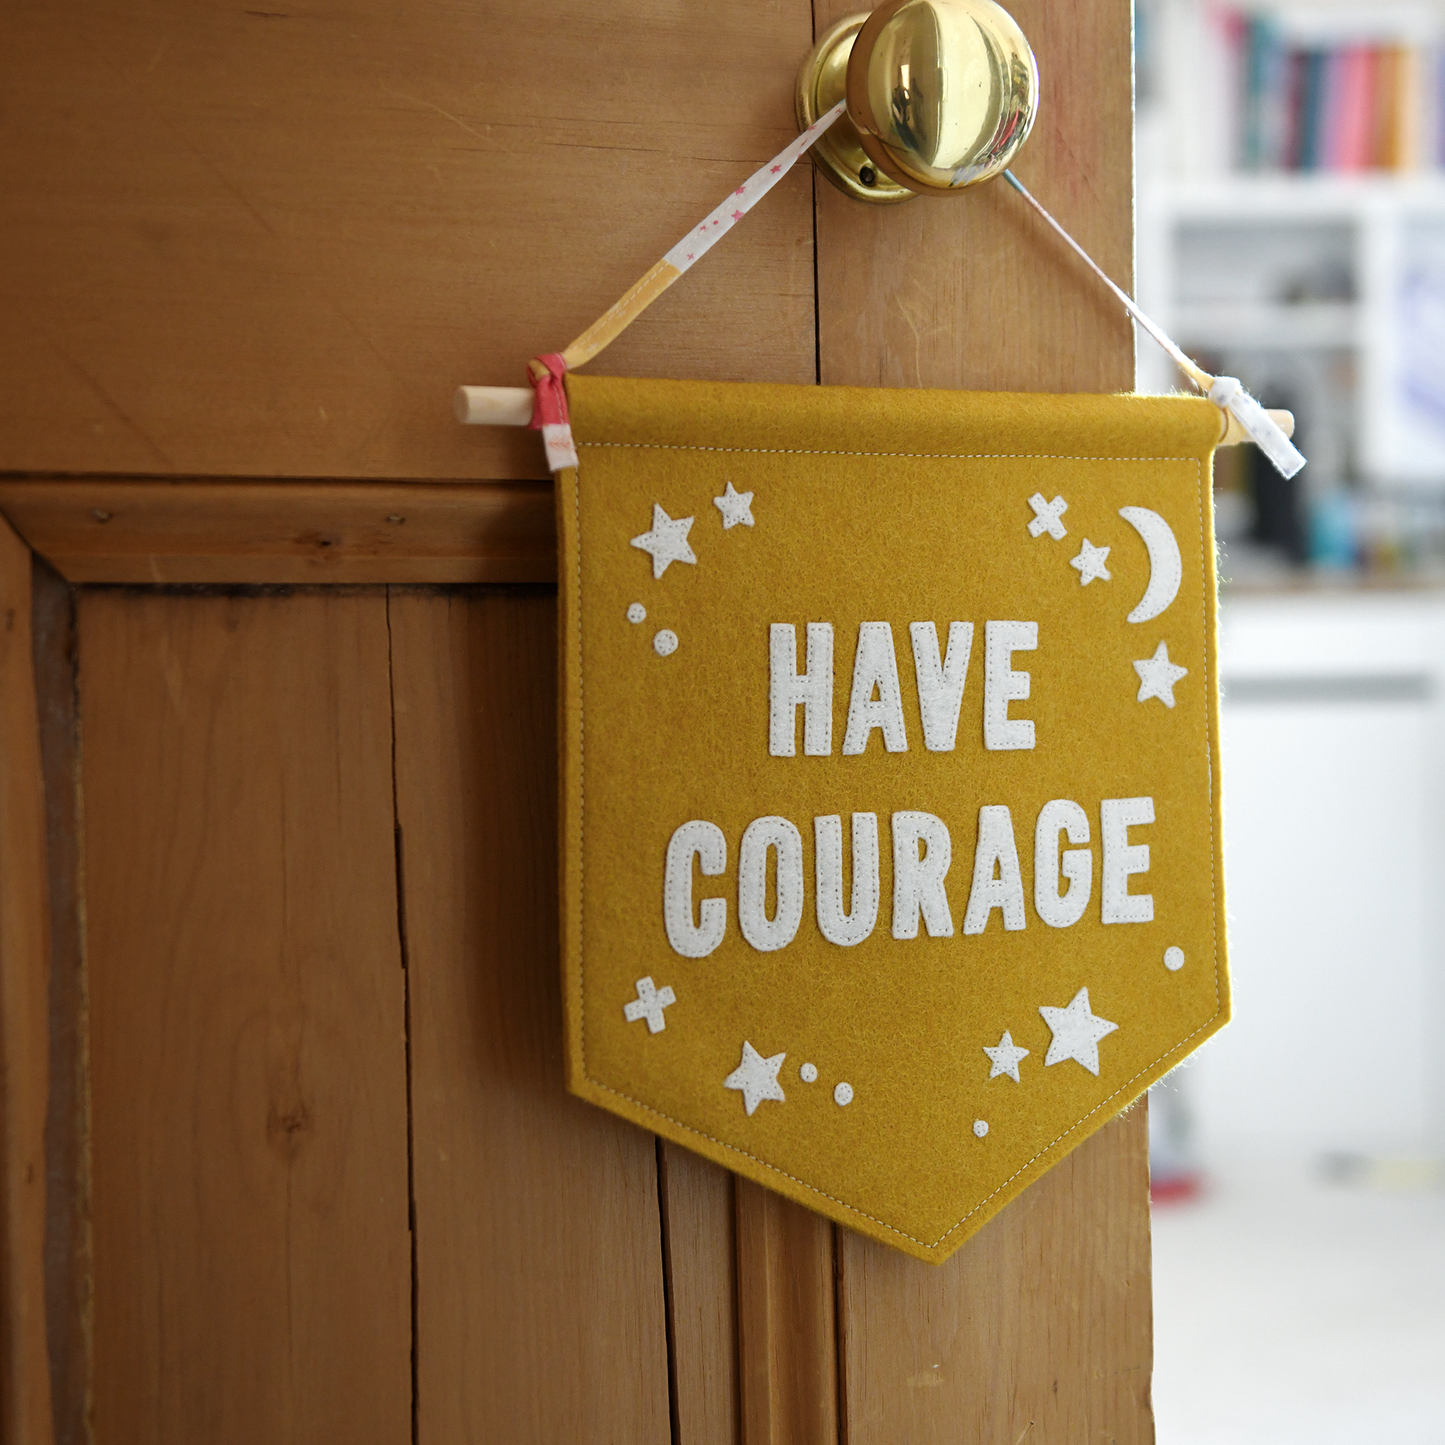 Have Courage positivity banner craft kit